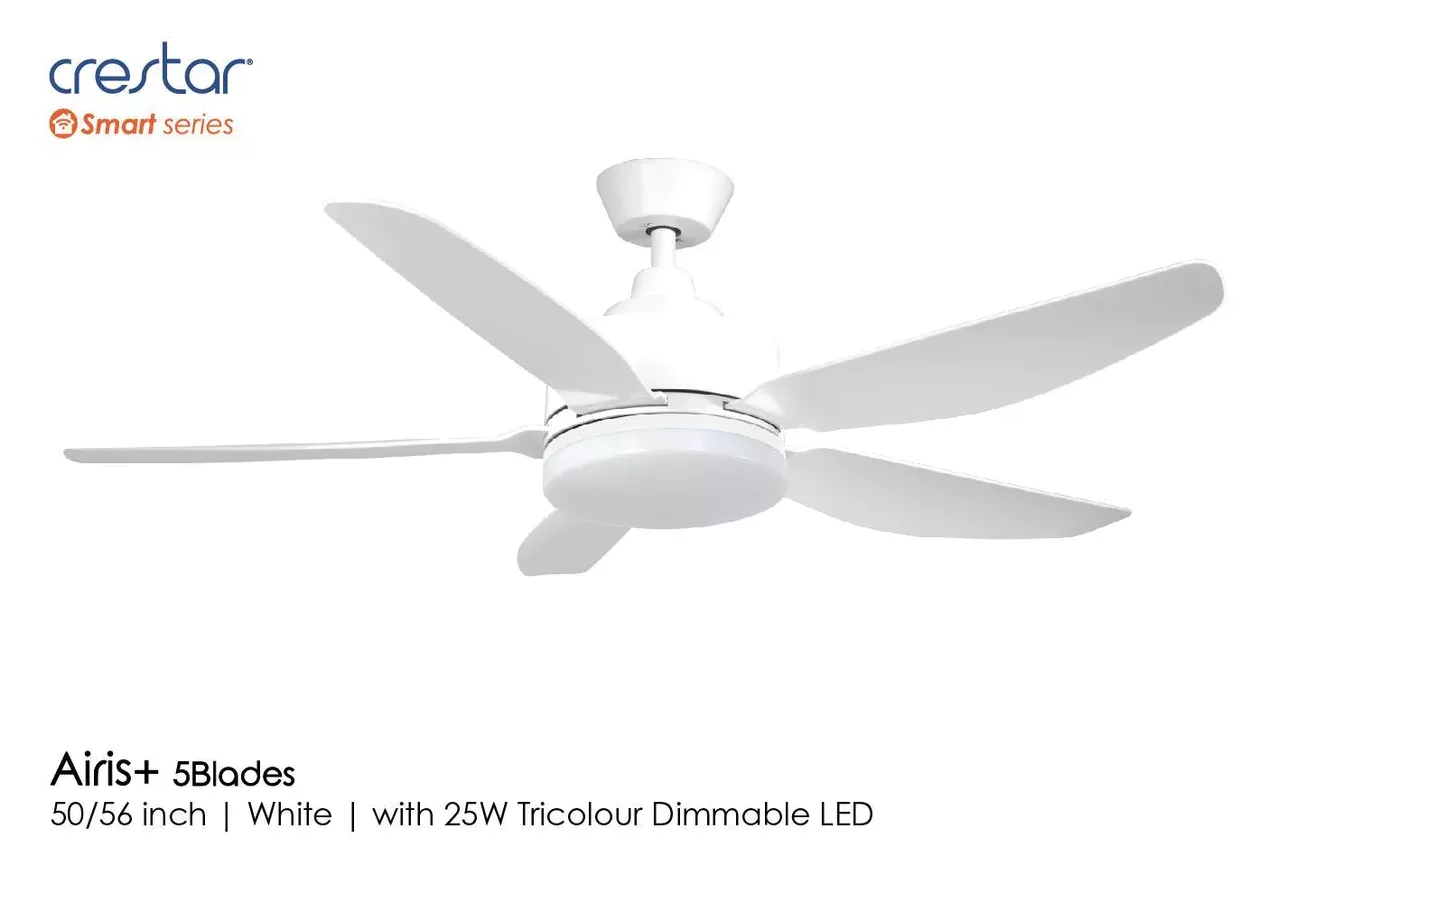 Smart Ceiling Fan in Singapore: Not only a choice, it also a revolution